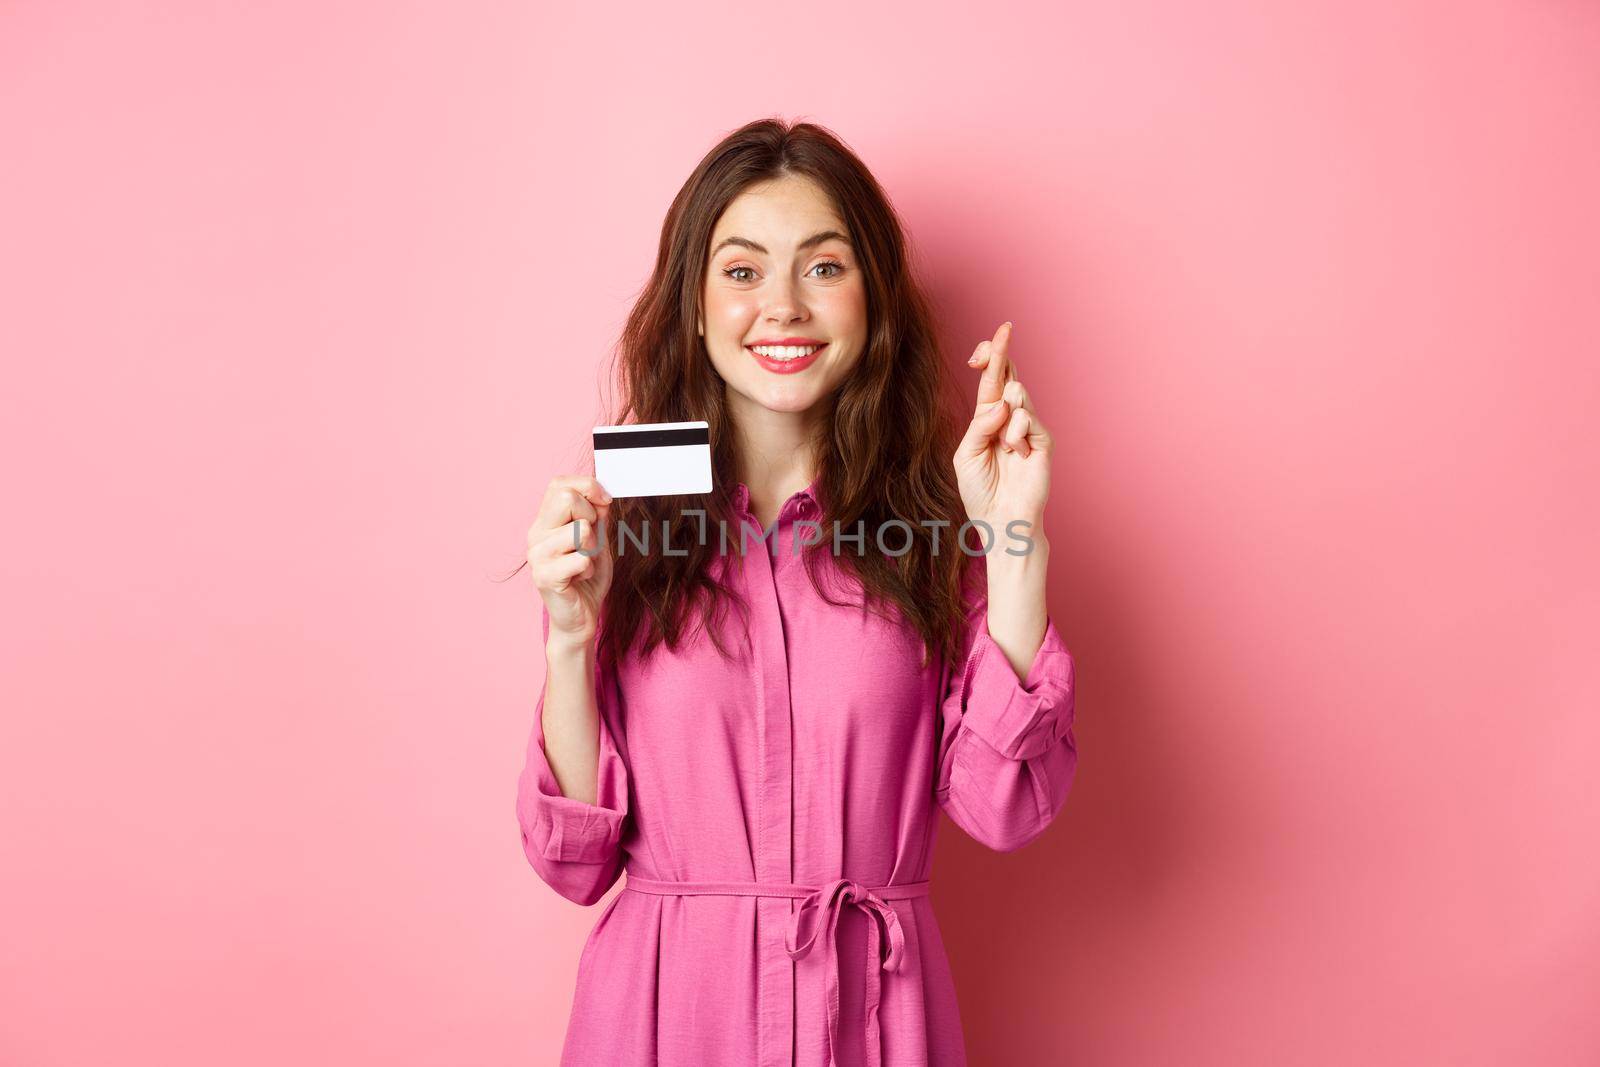 Image of hopeful young woman showing plastic credit card and cross fingers for good luck, making wish and smiling, standing against pink background.